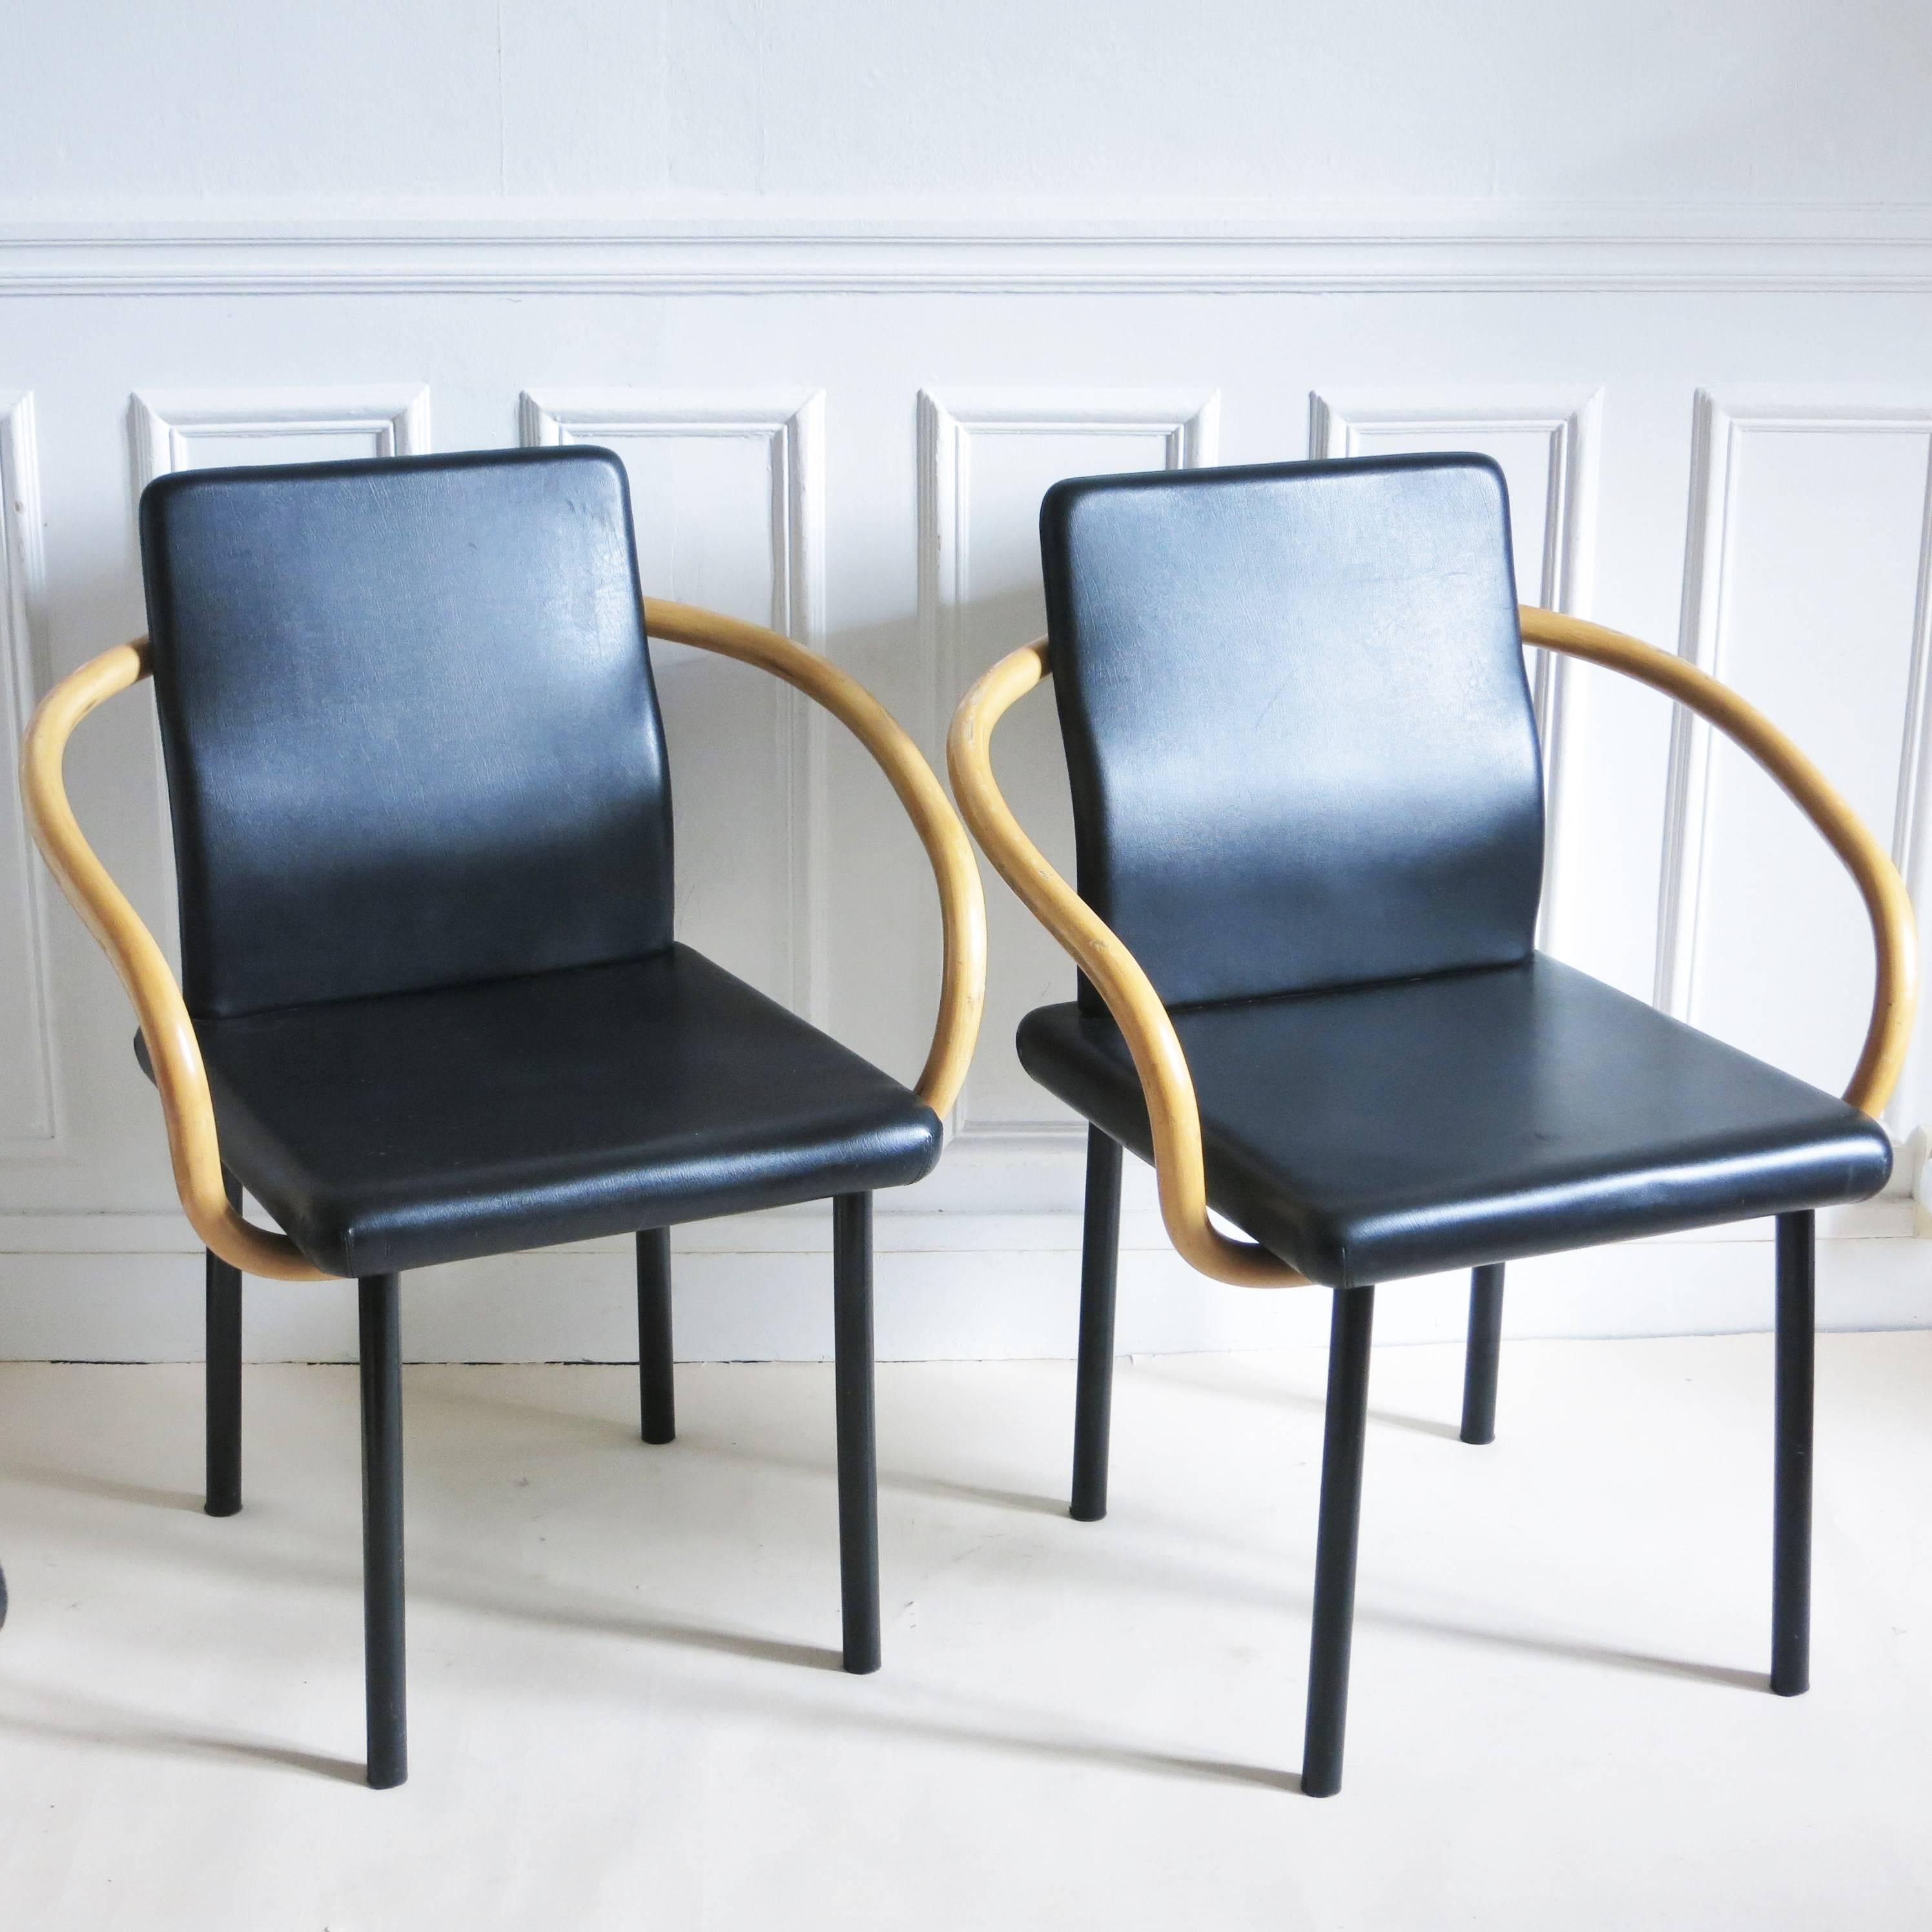 Post-Modern Set of Four Chairs Mandarin by Ettore Sottsass for Knoll